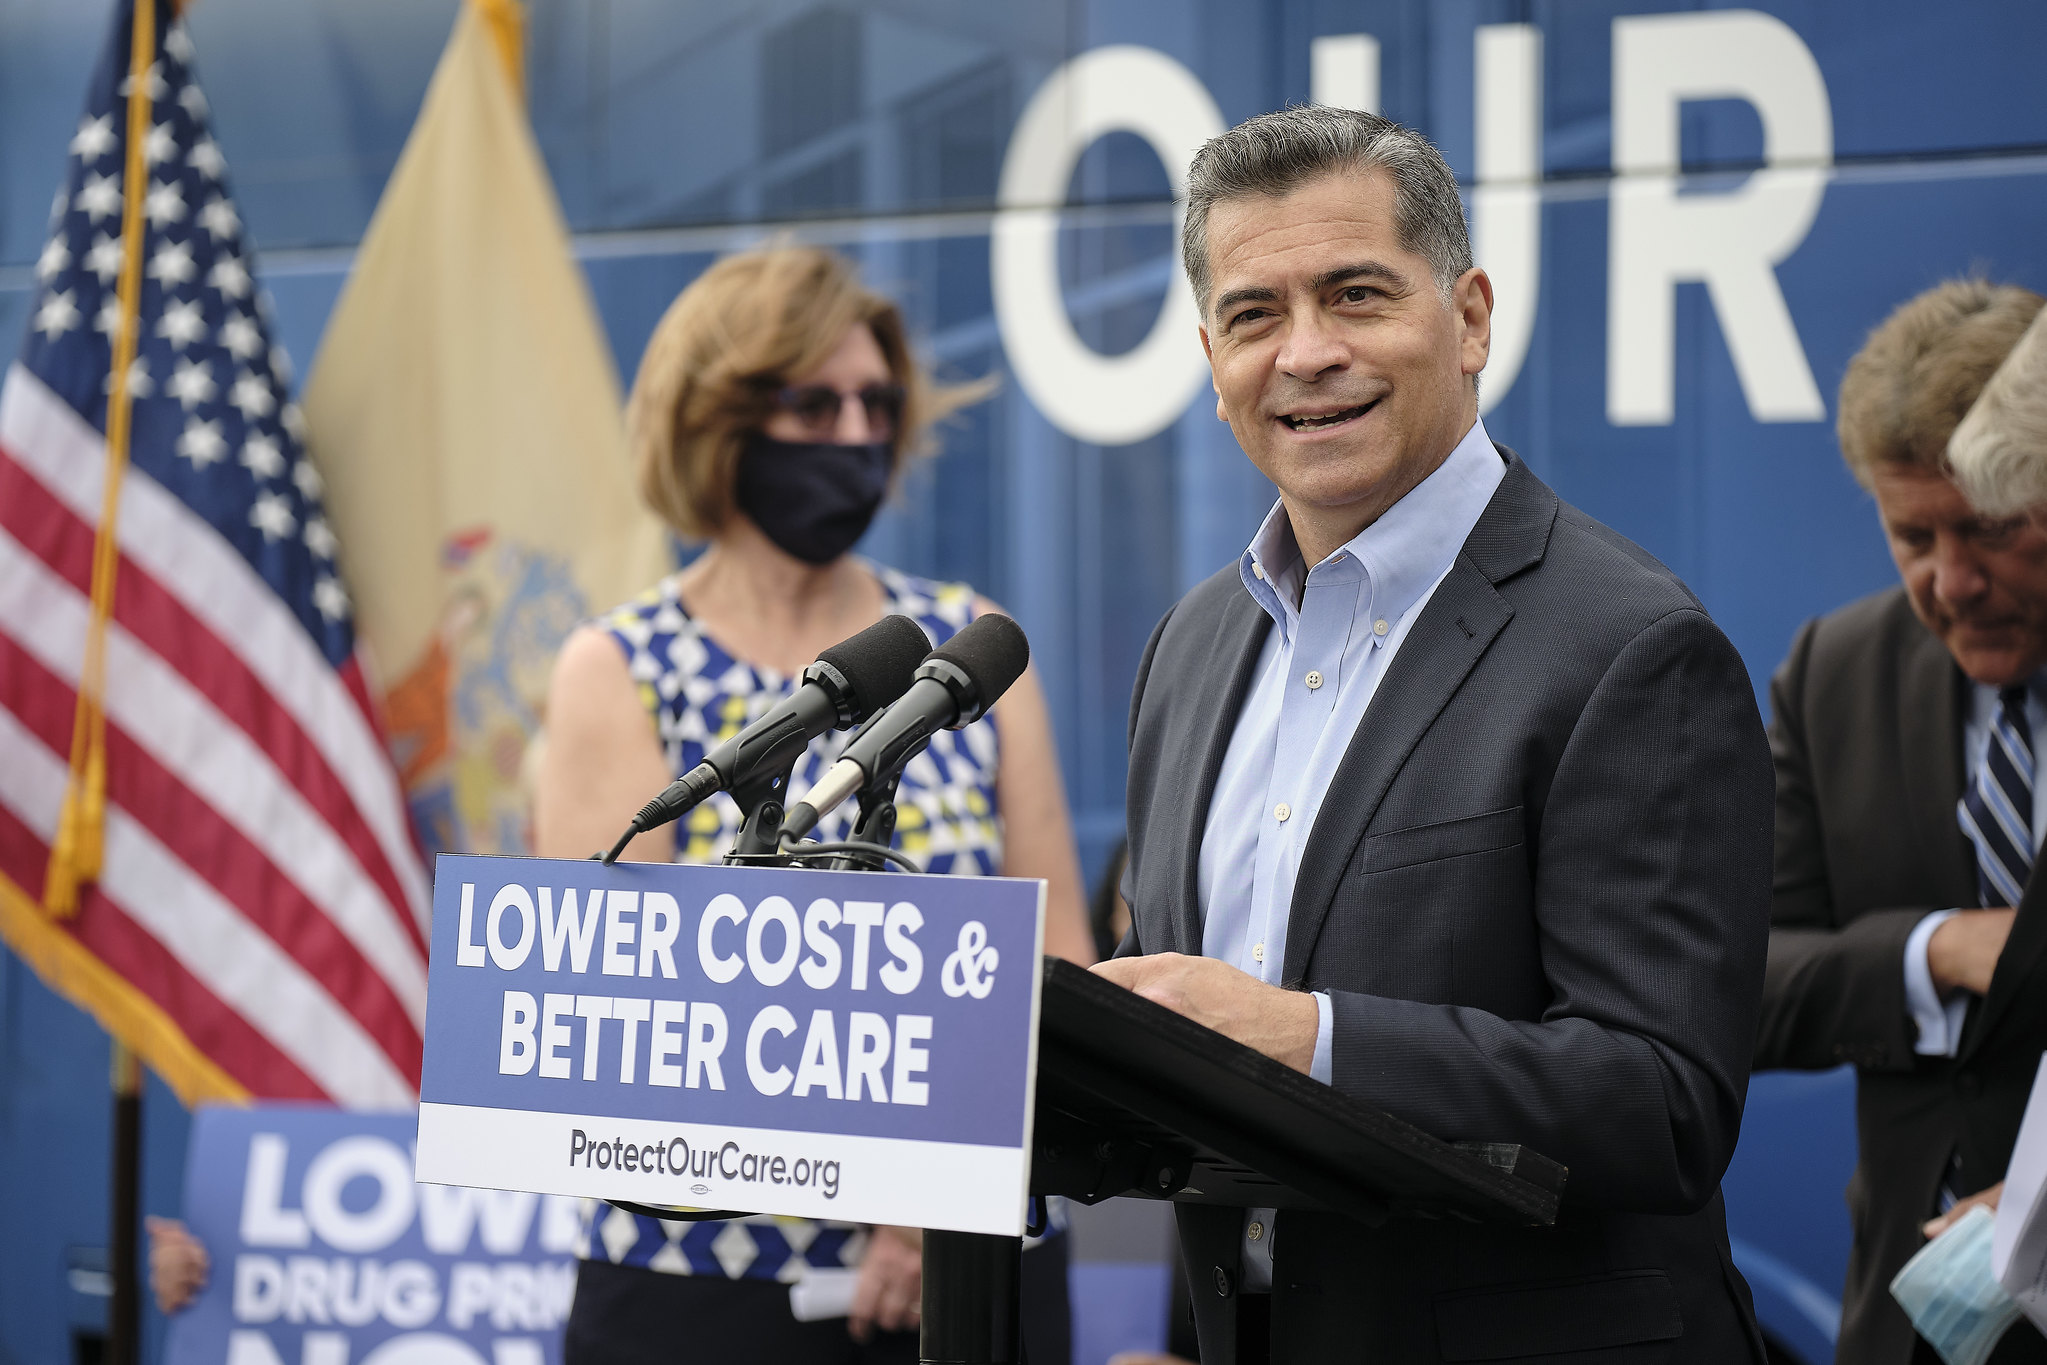 HHS Secretary Xavier Becerra, U.S. Rep. Frank Pallone, Jr., and Health Care Advocates Call for Action to Lower Costs and Improve Health Care for New Jerseyans